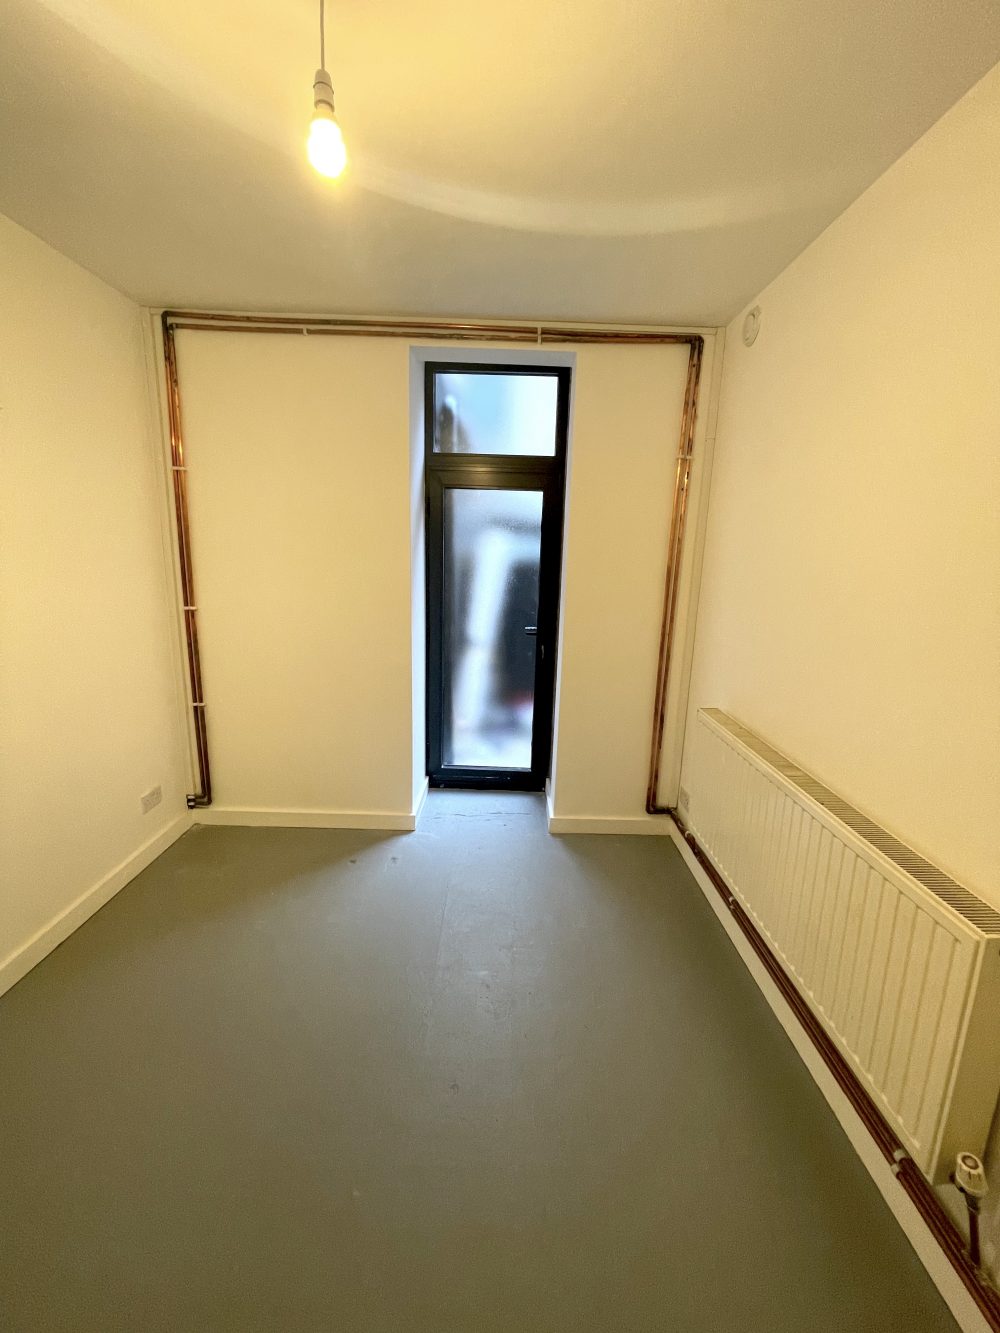 2 Bedroom Flat Available to rent in E9 London Fields Enterprise House Pic17